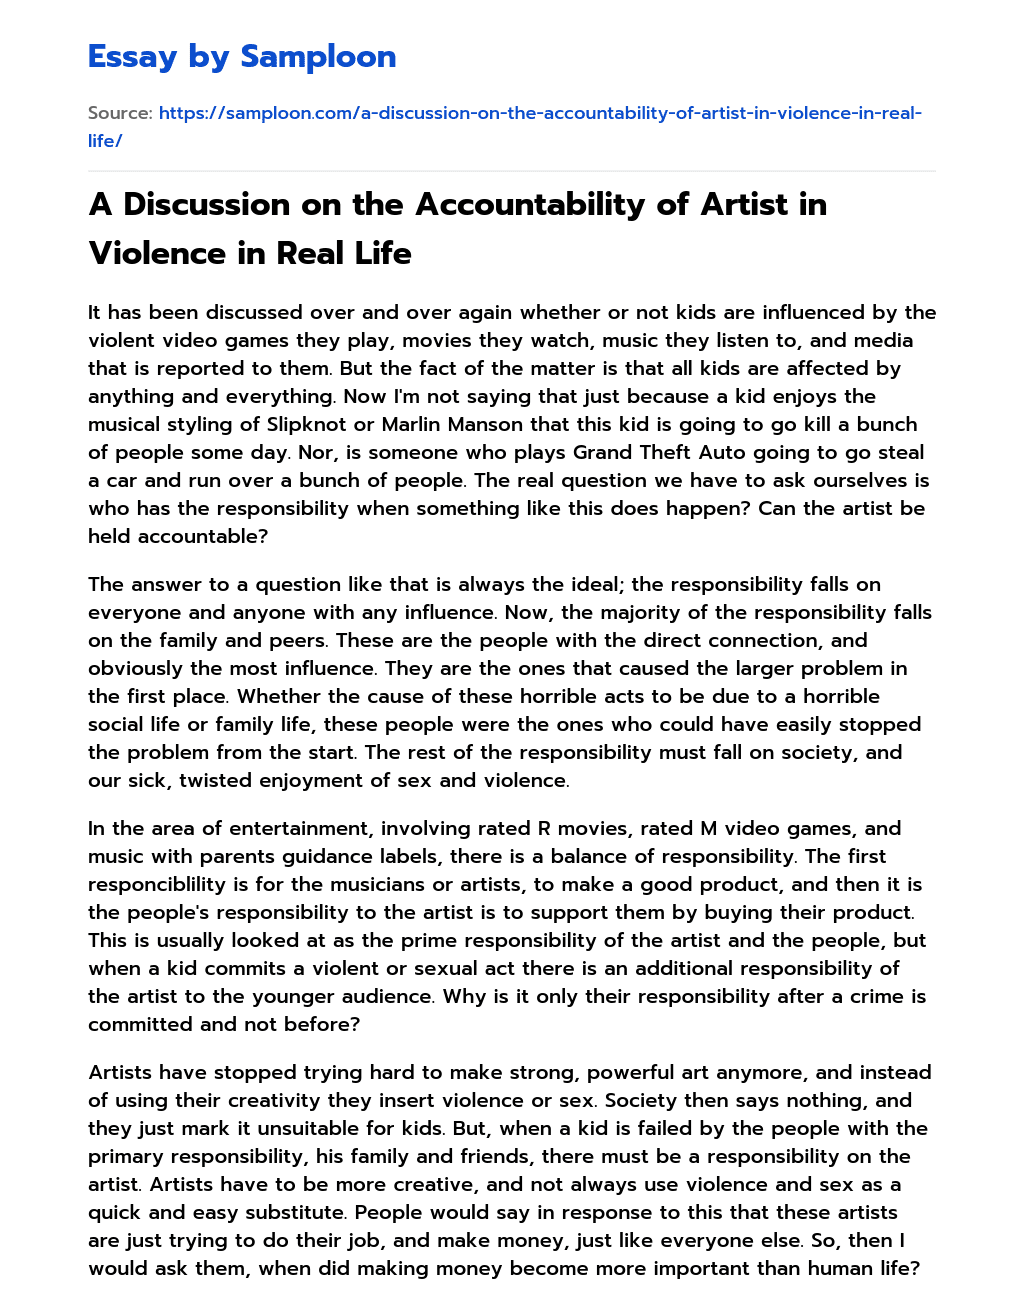 A Discussion on the Accountability of Artist in Violence in Real Life essay